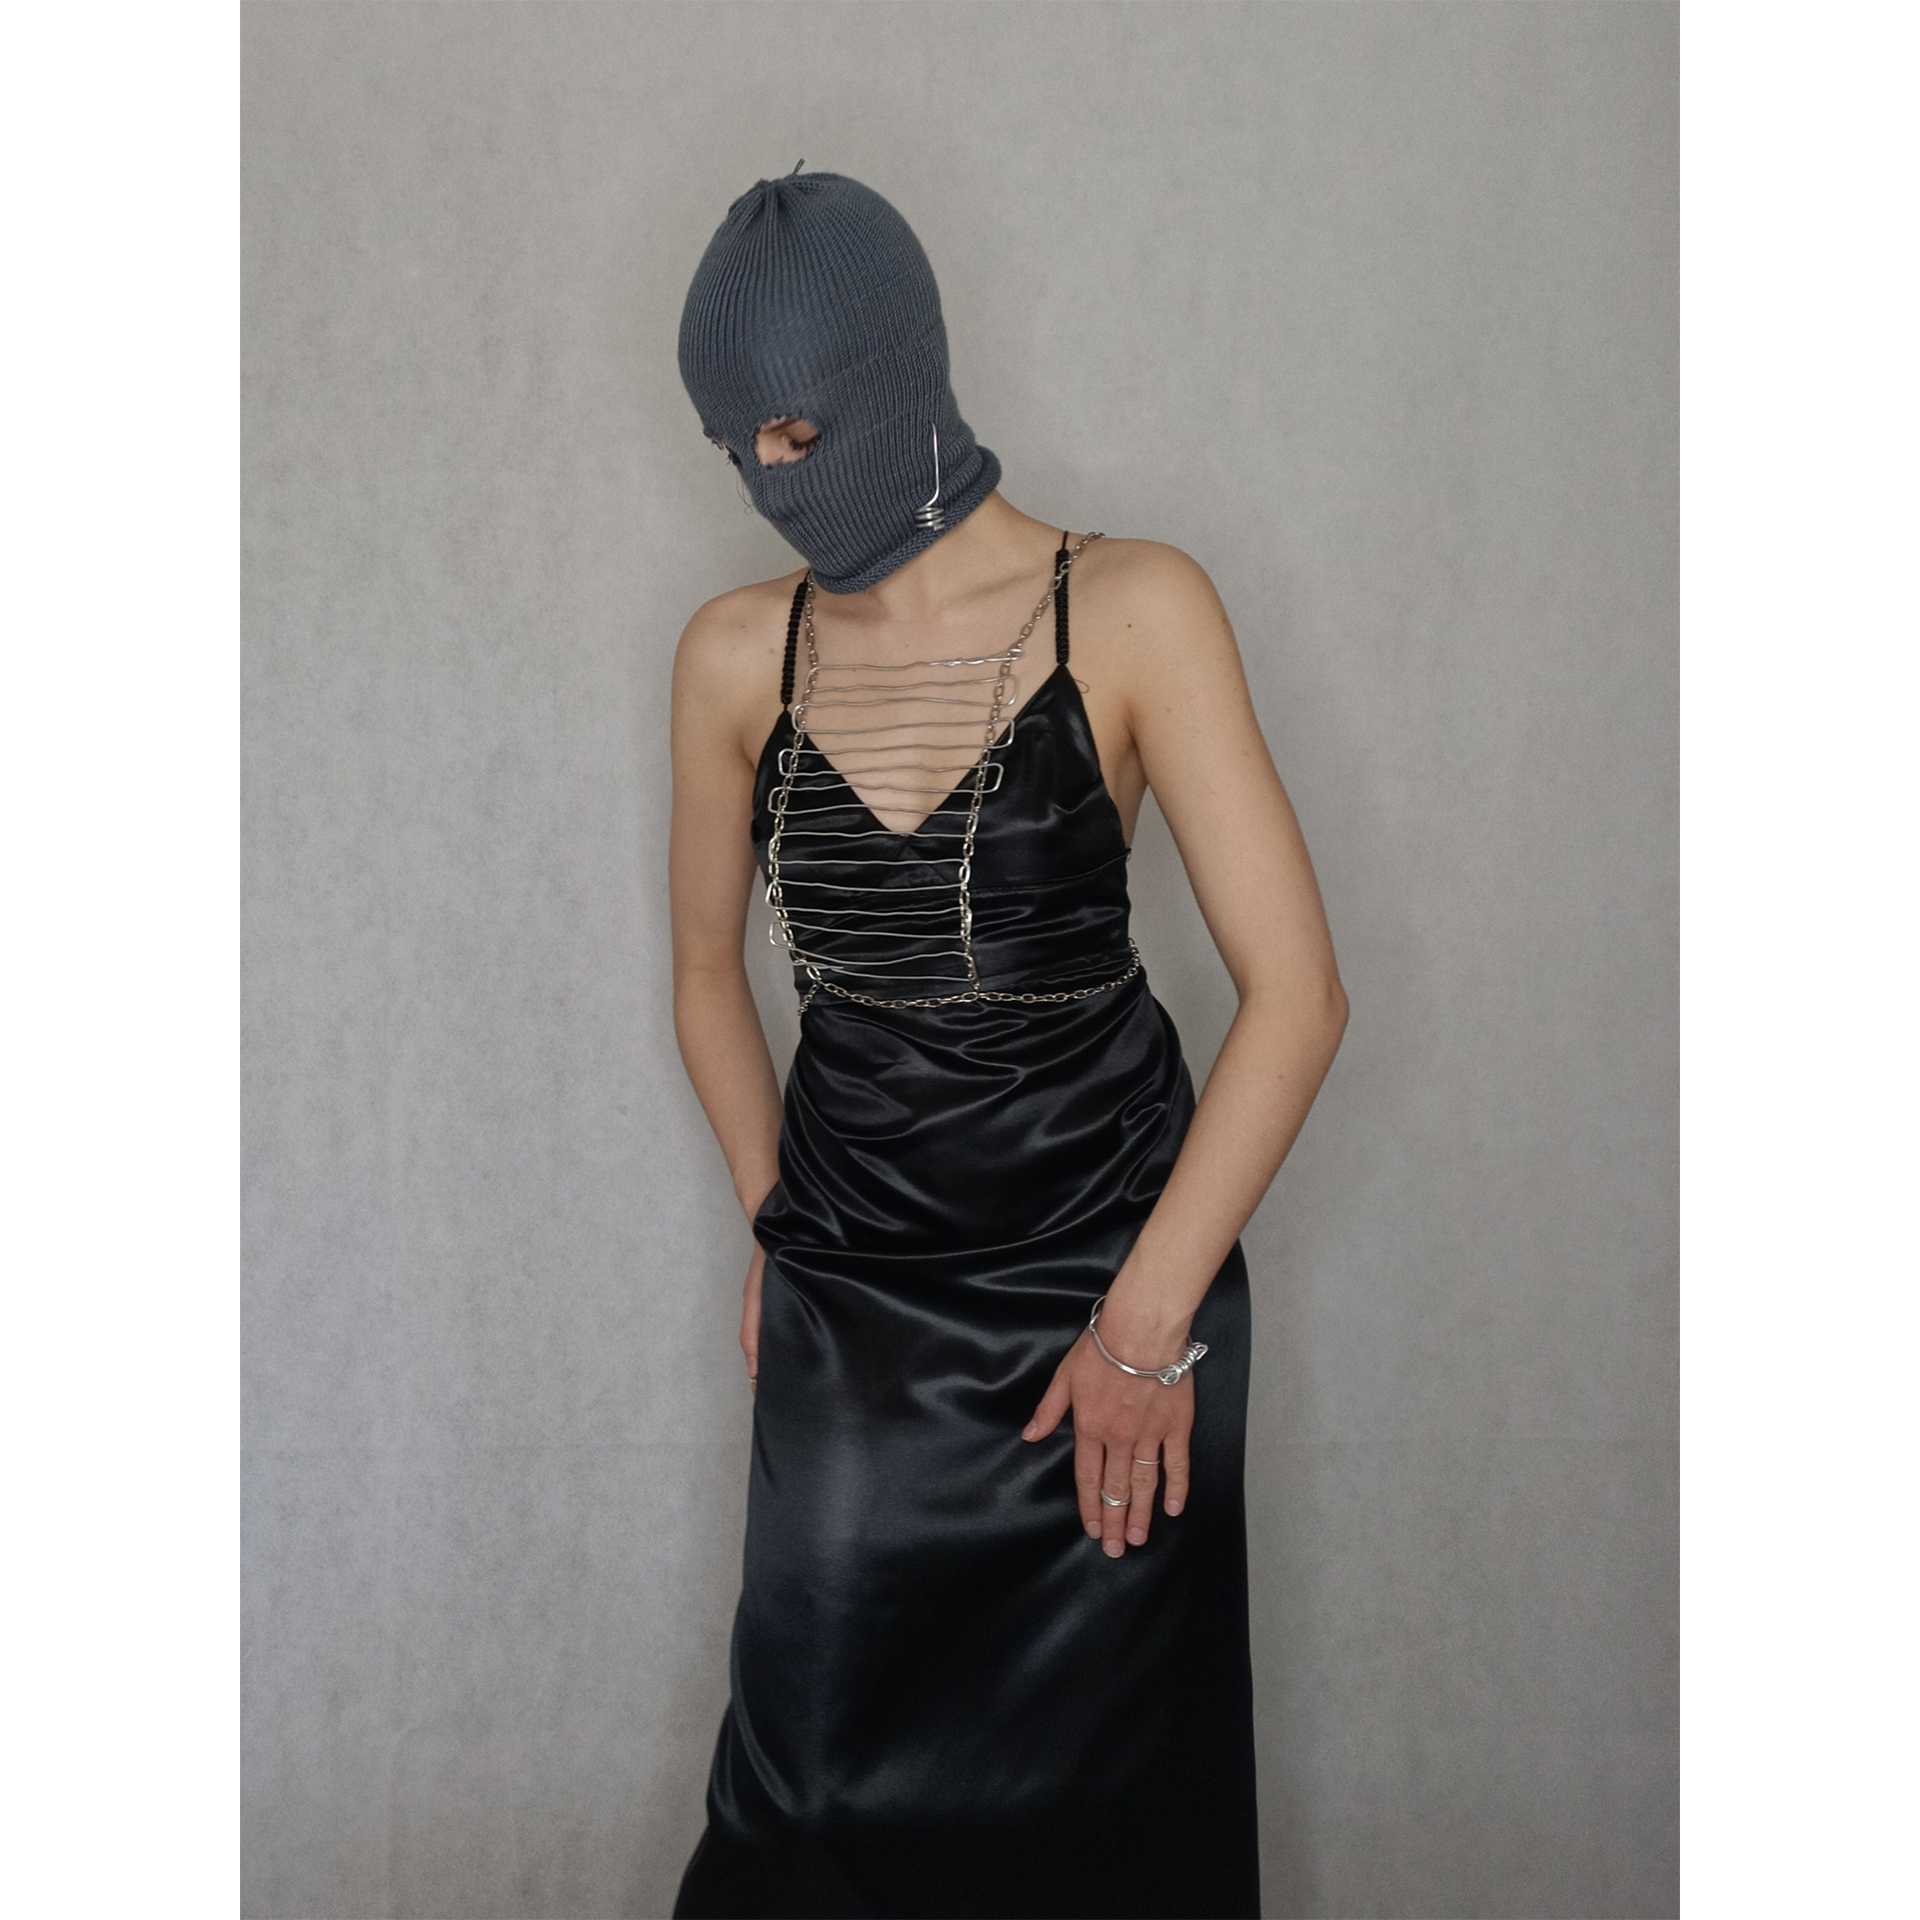 FMP "AM I FREE?" 
look 1
(chest jewelry symbolizes a birdcage in the sense of prison and taking away freedom, balaclava symbolizes anonymity)